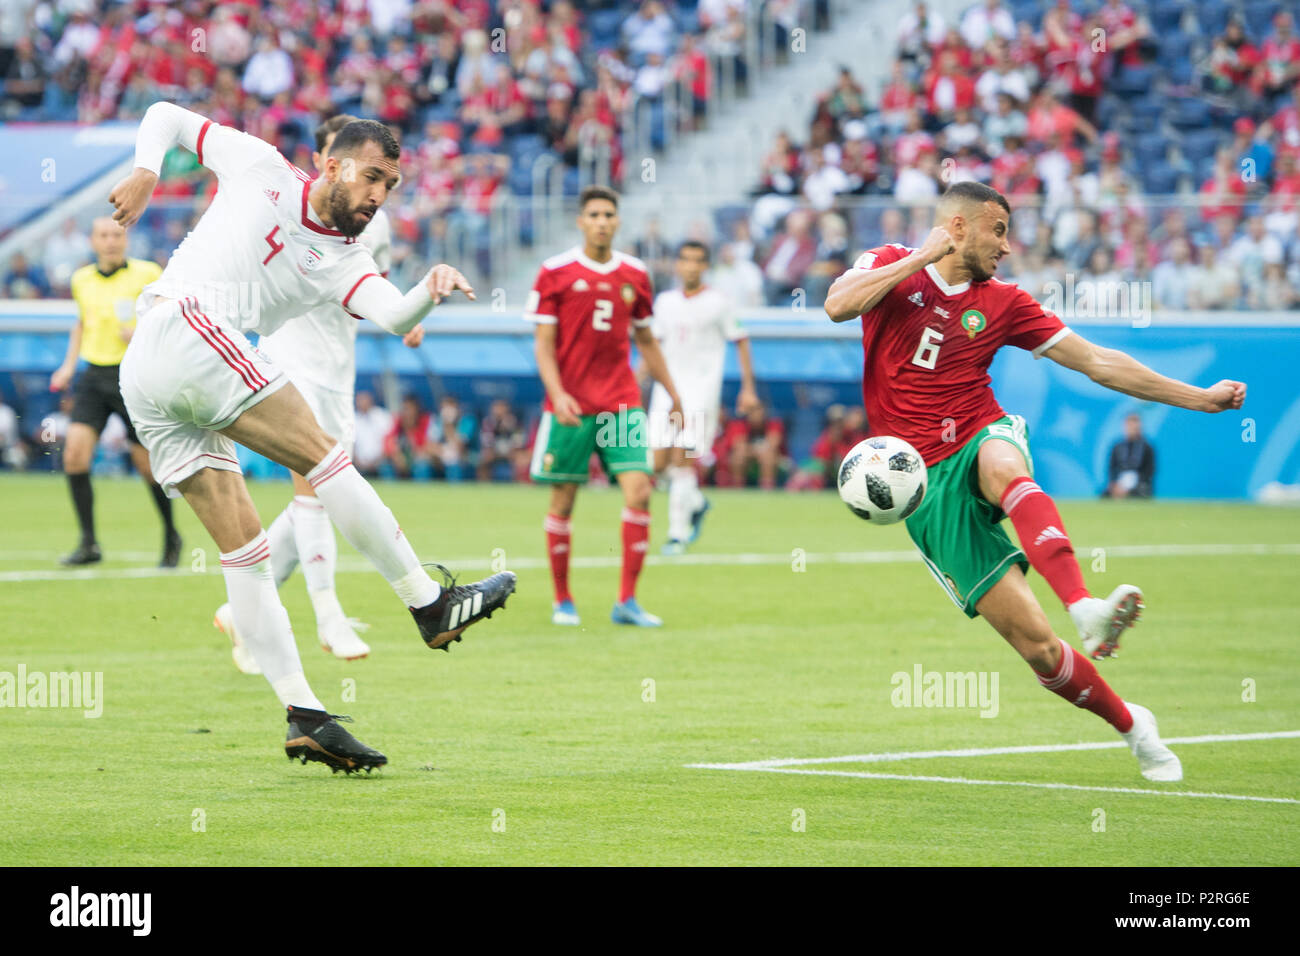 Roozbeh CHESHMI (left, IRN) versus Romain SAISS (MAR), action, duels, Morocco (MAR) - Iran (IRN) 0: 1, preliminary round, group B, match 4, on 15.06.2018 in St.Petersburg; Football World Cup 2018 in Russia from 14.06. - 15.07.2018. | usage worldwide Stock Photo